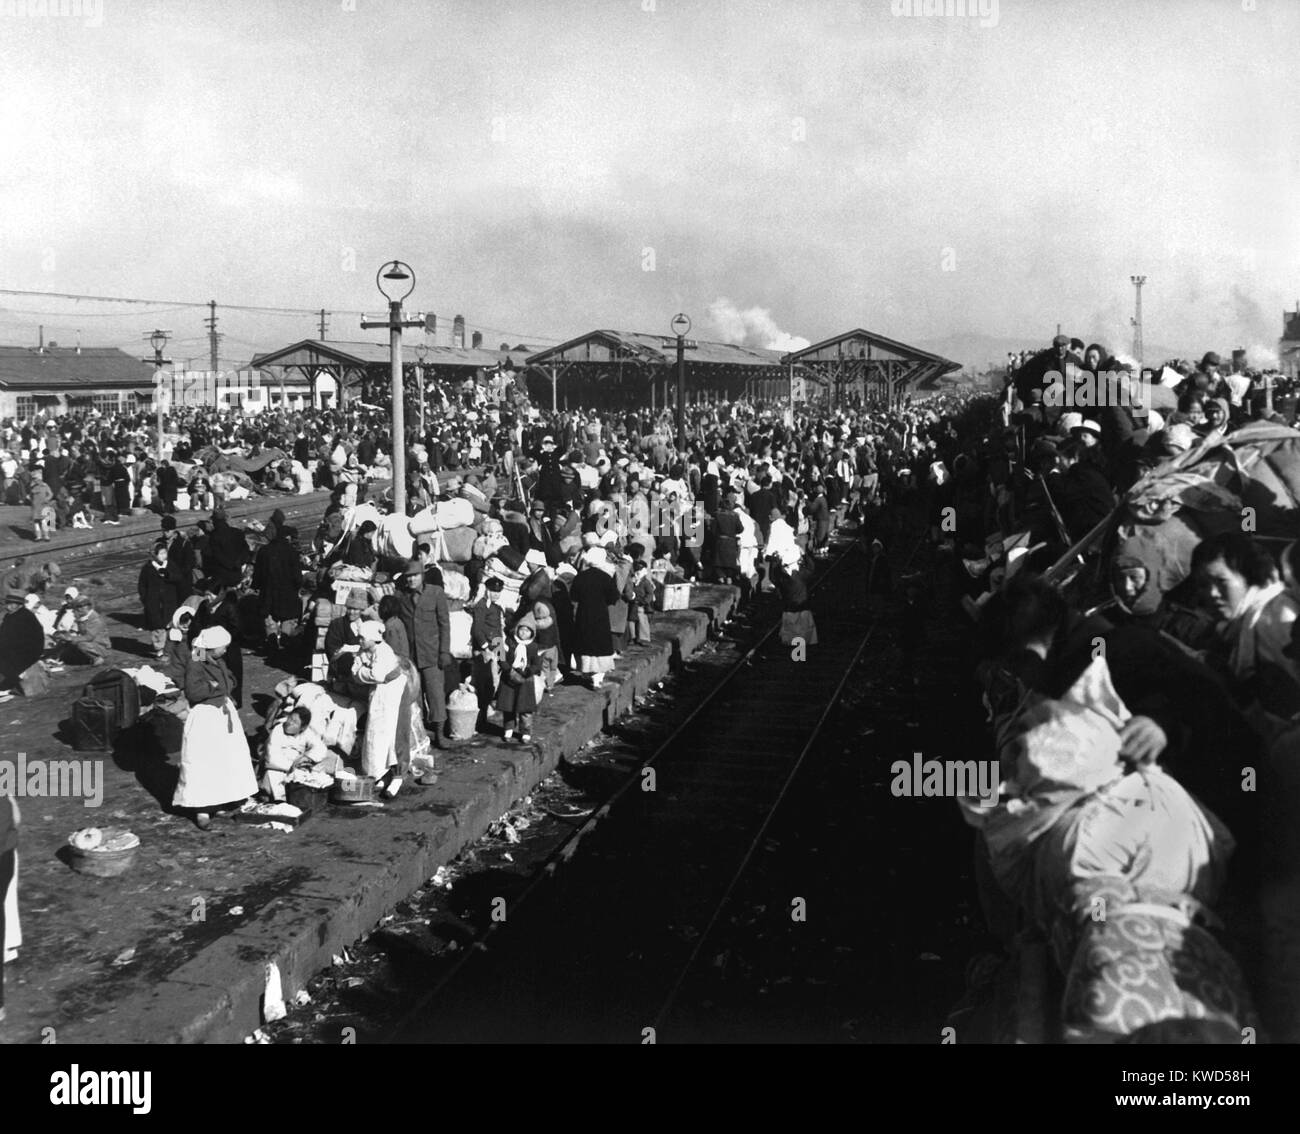 Refugees crowd railway depot at Inchon, Korea, Jan. 3, 1951. They are fleeing the advancing North Korean/Chinese troops after the failure of the UN invasion (Nov.-Dec.-1950) above the 38th parallel. Nearby Seoul fell to the Communists on Jan. 7, 1951. Korean War, 1950-53. (BSLOC 2014 11 246) Stock Photo